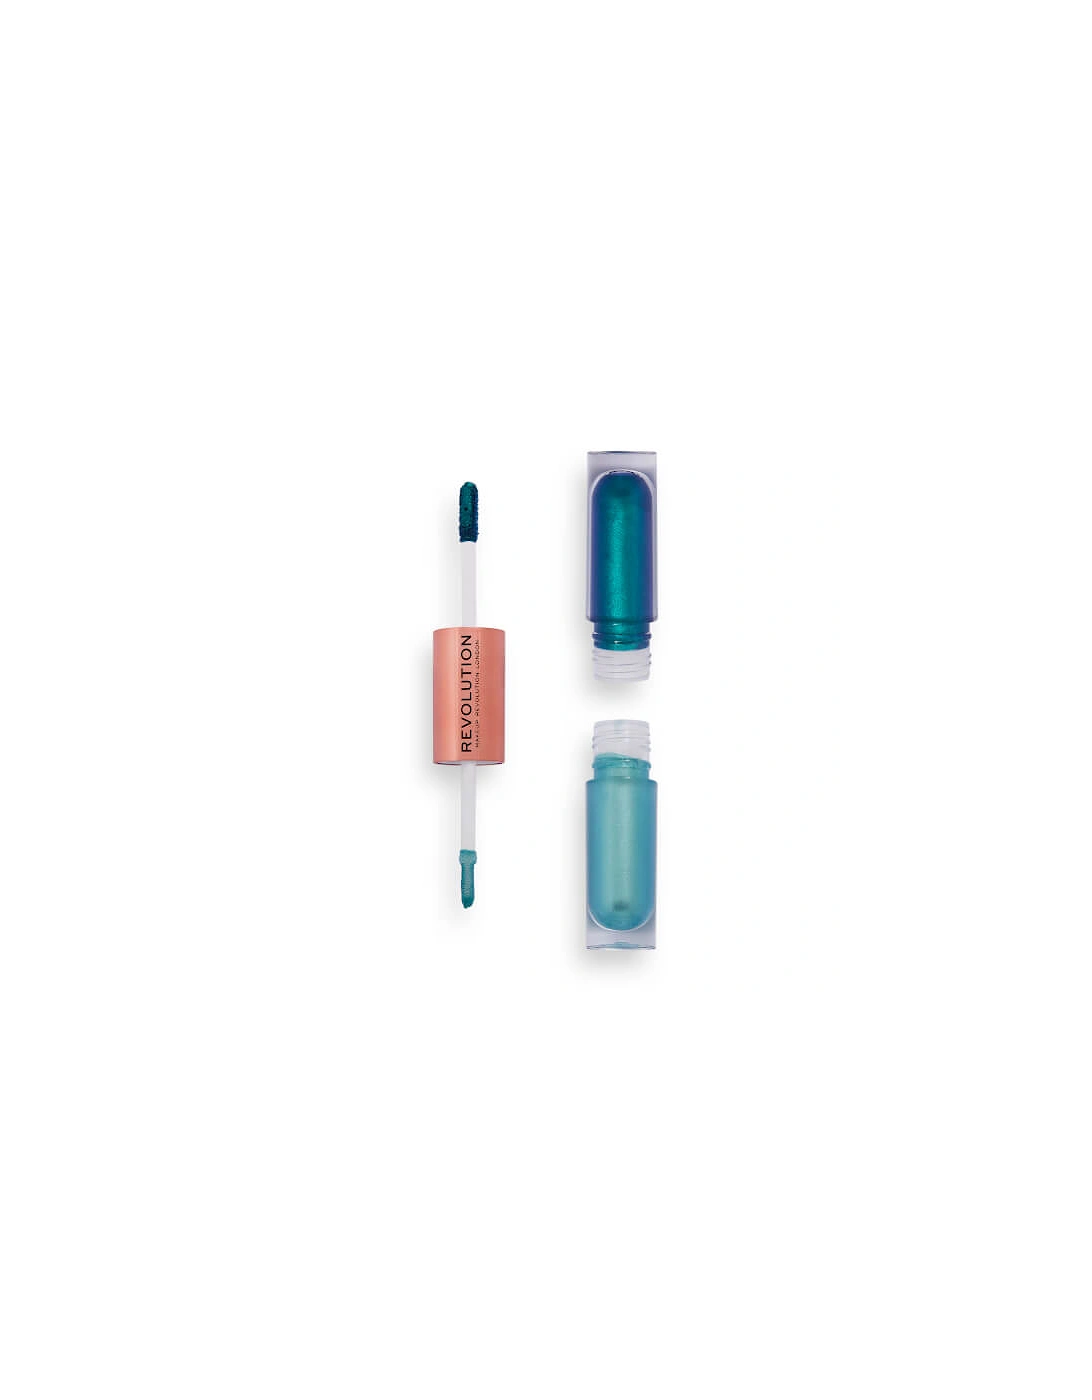 Makeup Double Up Liquid Shadow Tranquillity Blue, 2 of 1